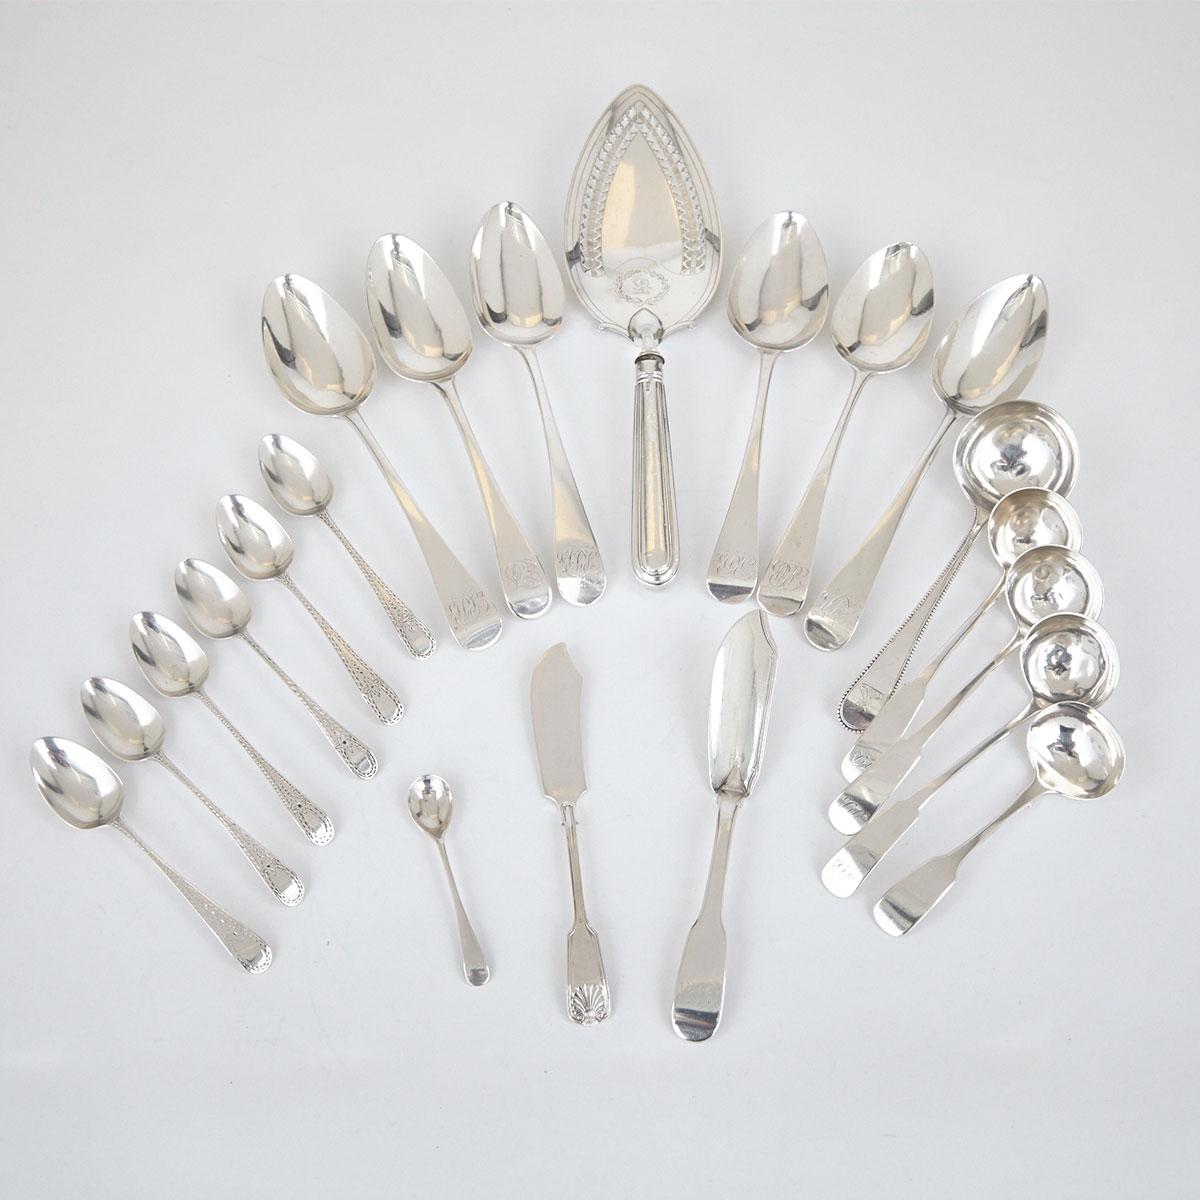 Grouped Lot of Georgian and Later Silver Flatware, mainly late 18th/early 19th century